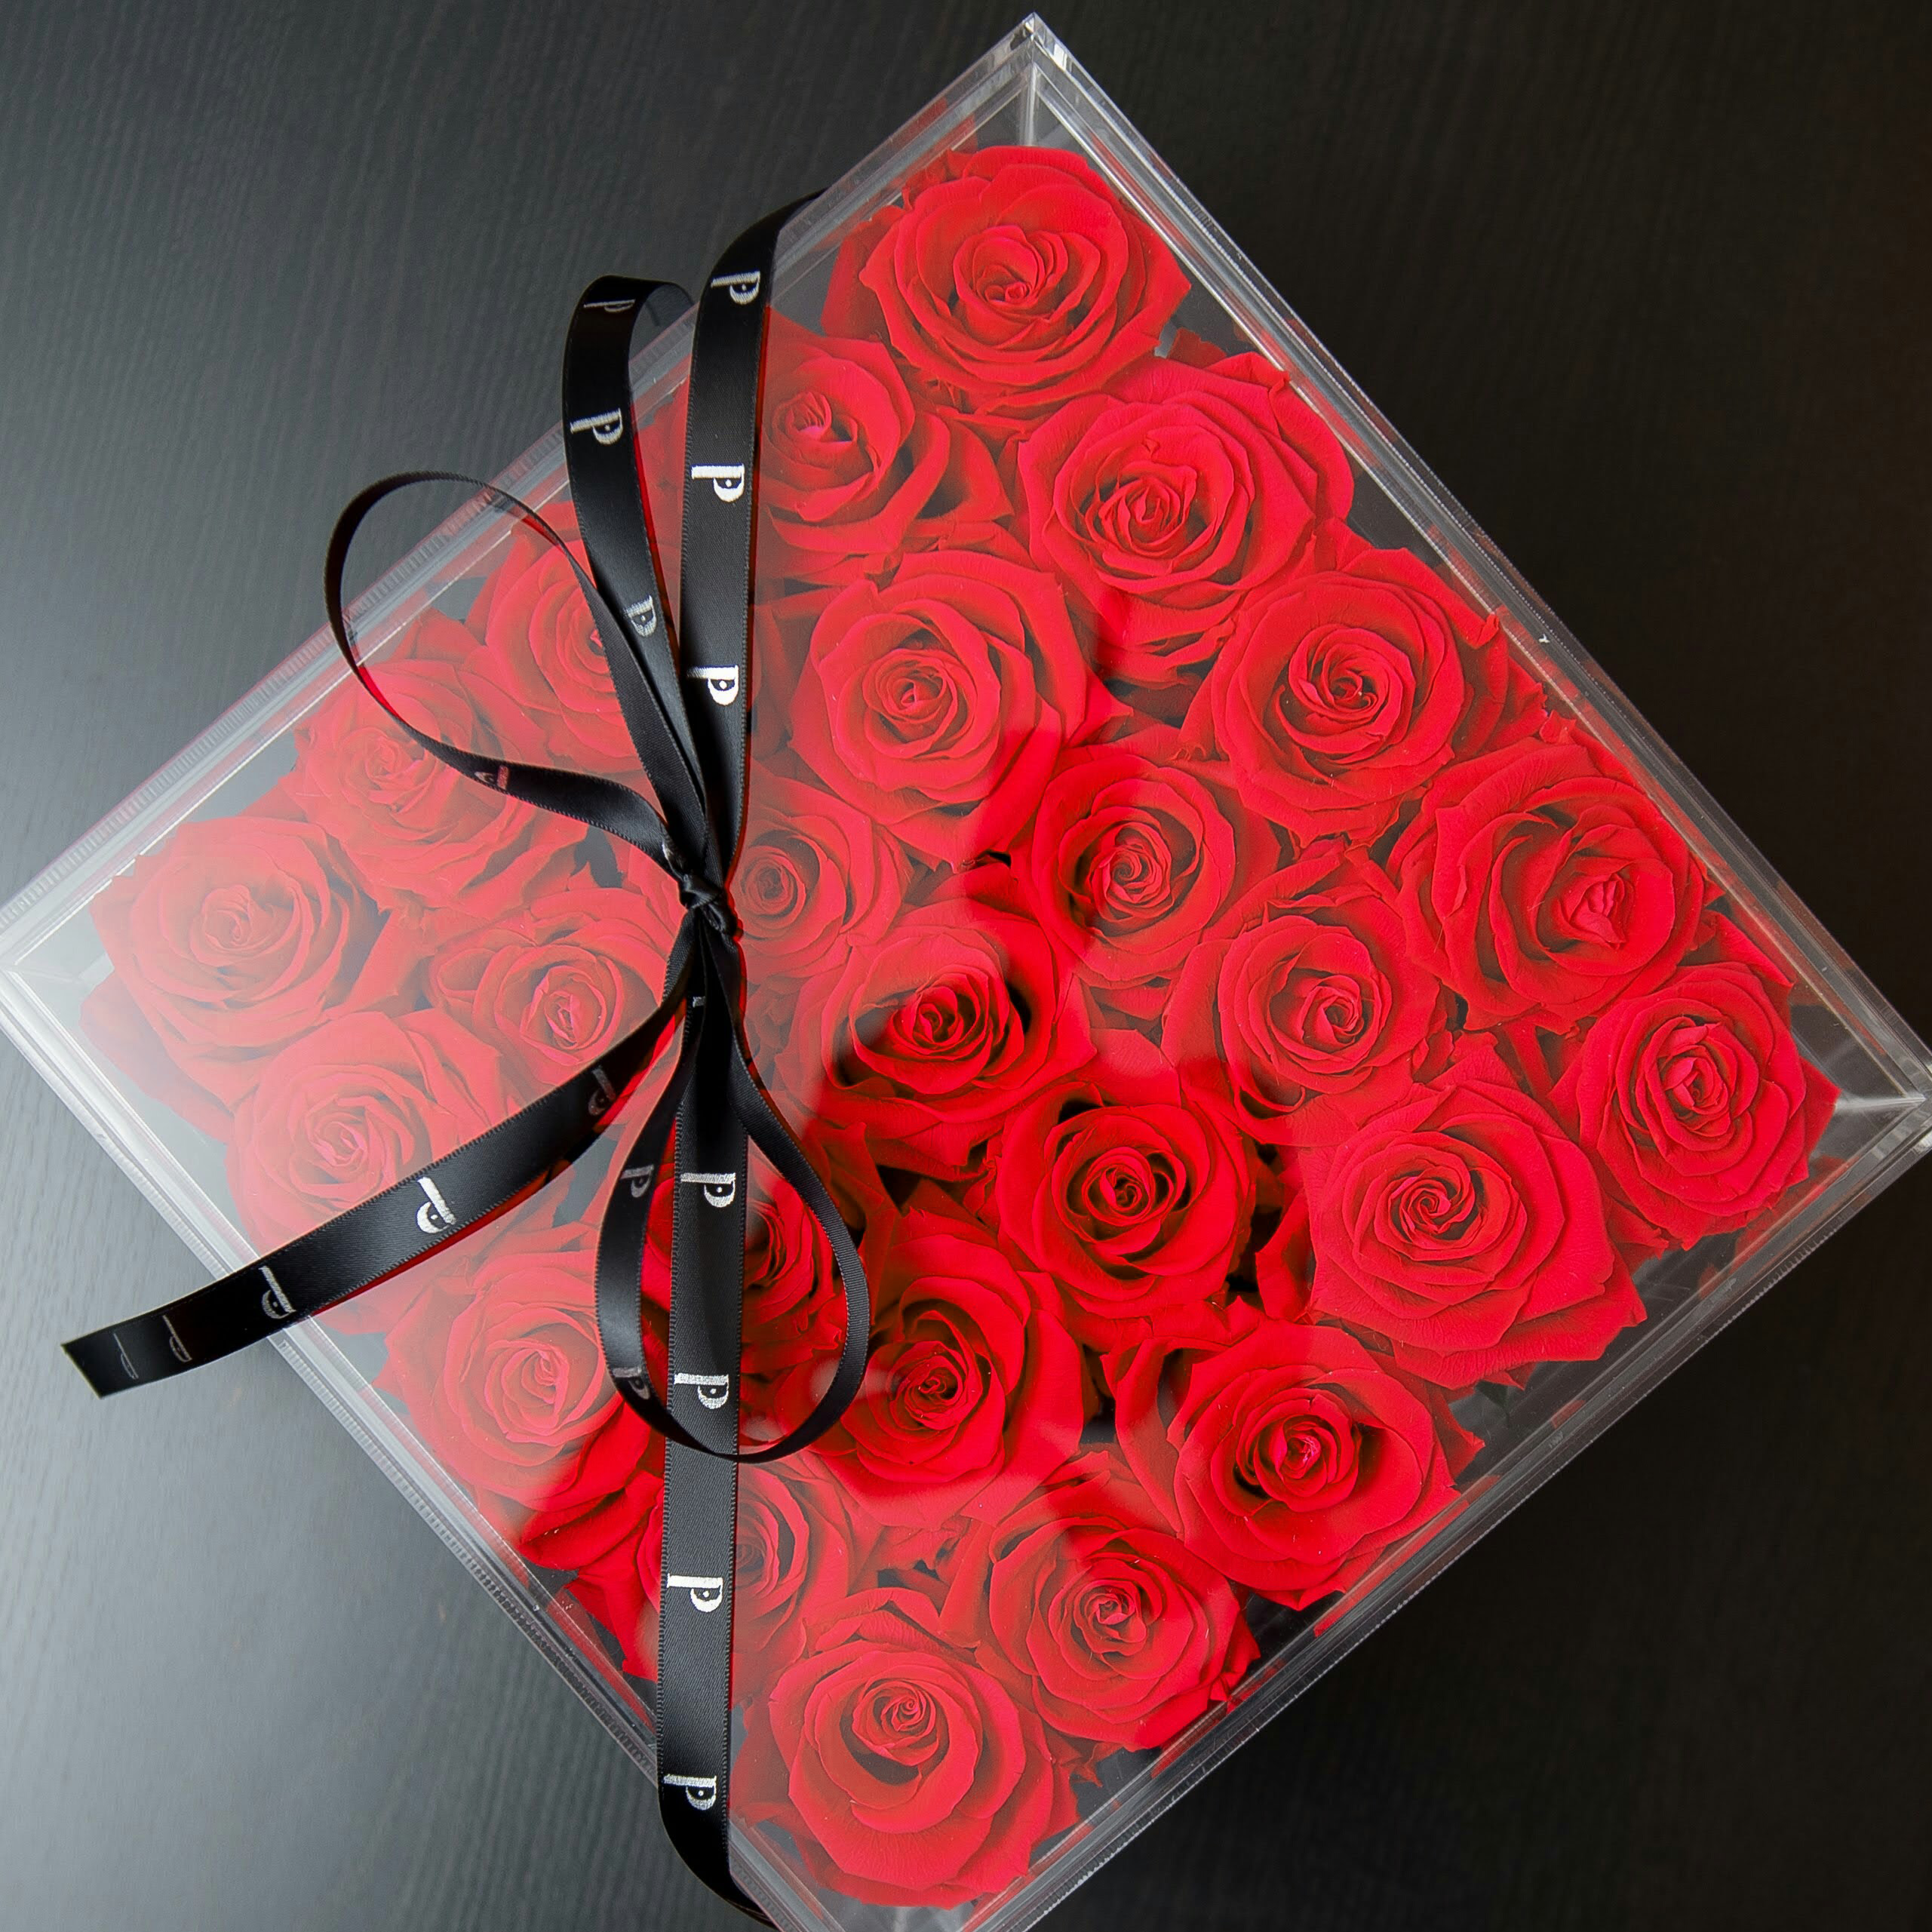 SRQ Modern Preserved | 25 Infinity Roses and Stems